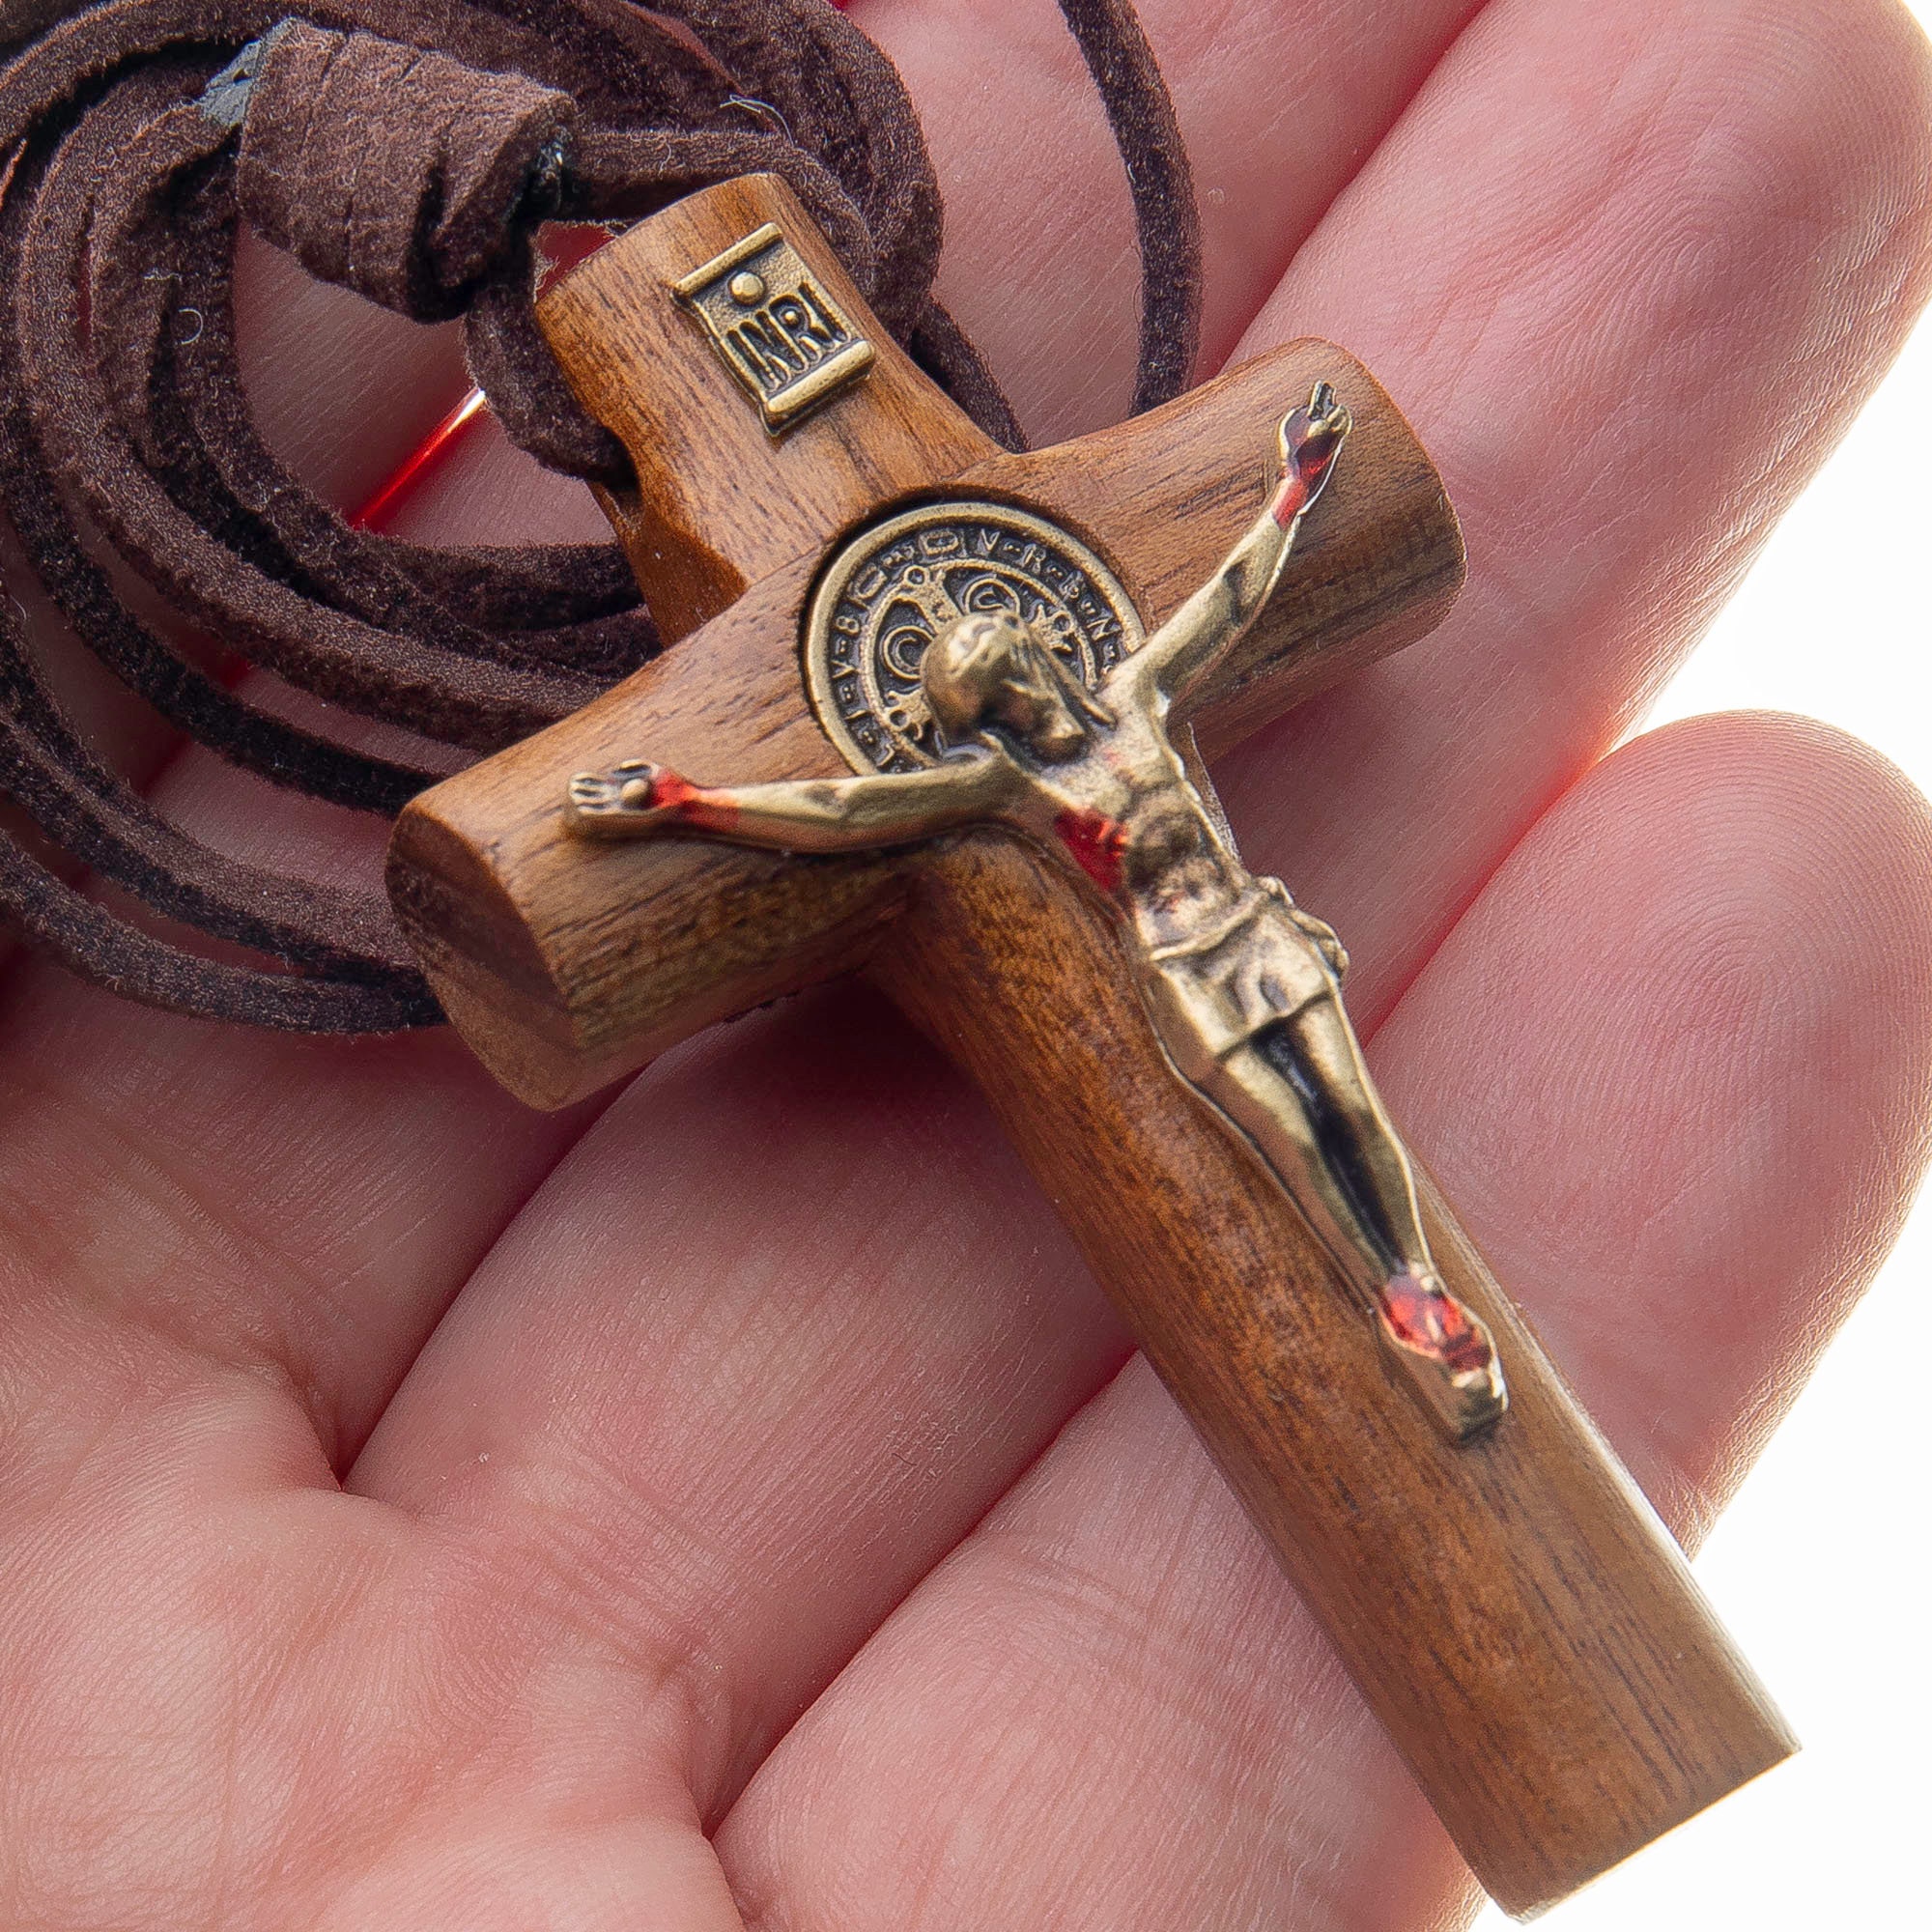 Hand Carved Tapered Wooden Cross Necklace for Men & Women on Adjustable Long Leather Cord - Available in Black or Brown - Wood Cross Pendant Gift